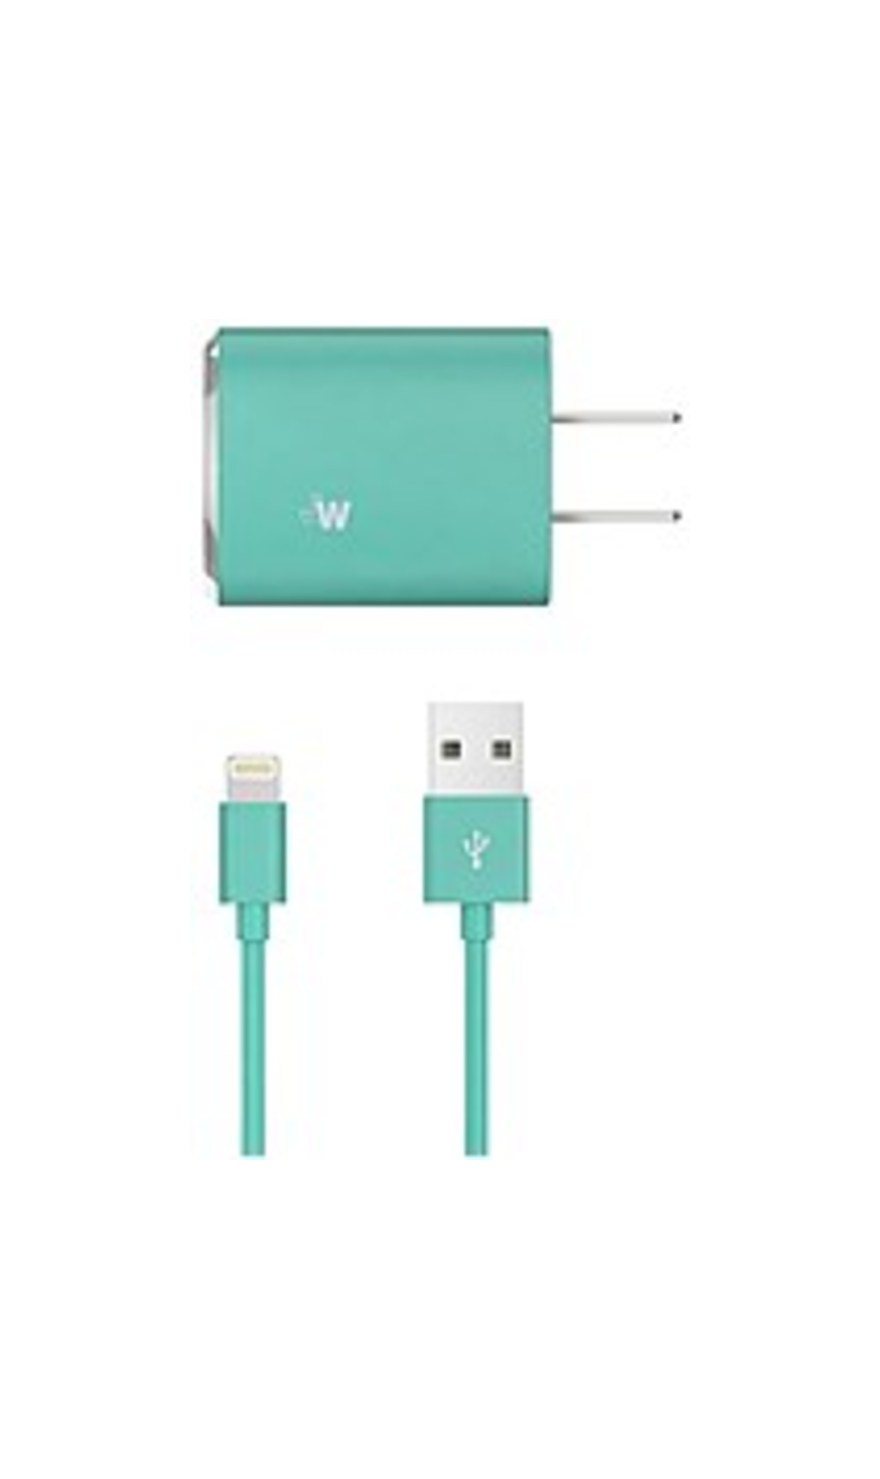 Just Wireless 705954045045 8-Pin Lightning to USB Home Charger - Teal